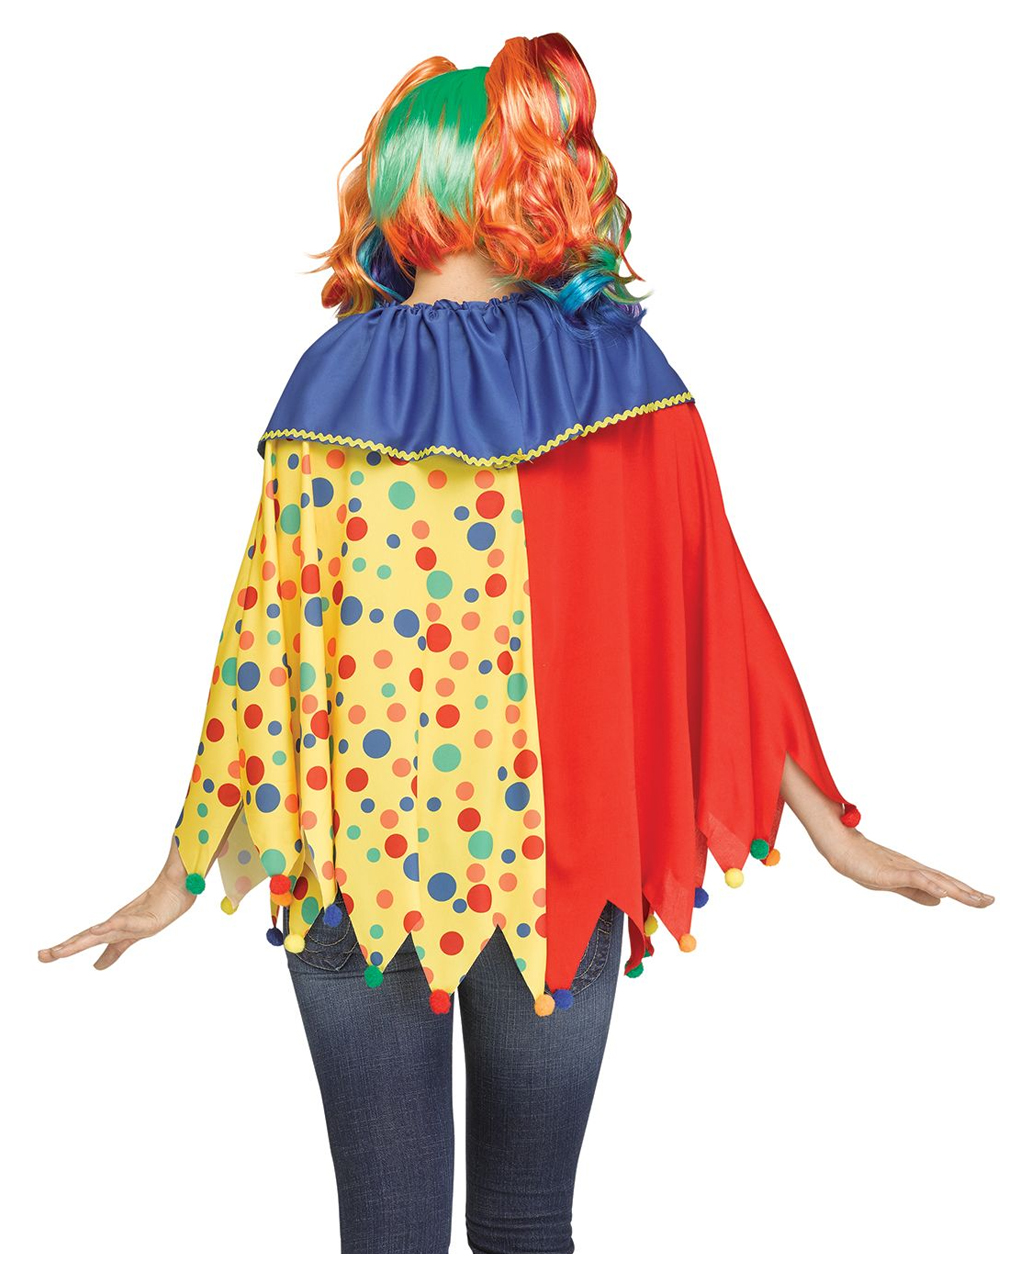 Colourful Clownsponcho One Size Buy HERE | Horror-Shop.com